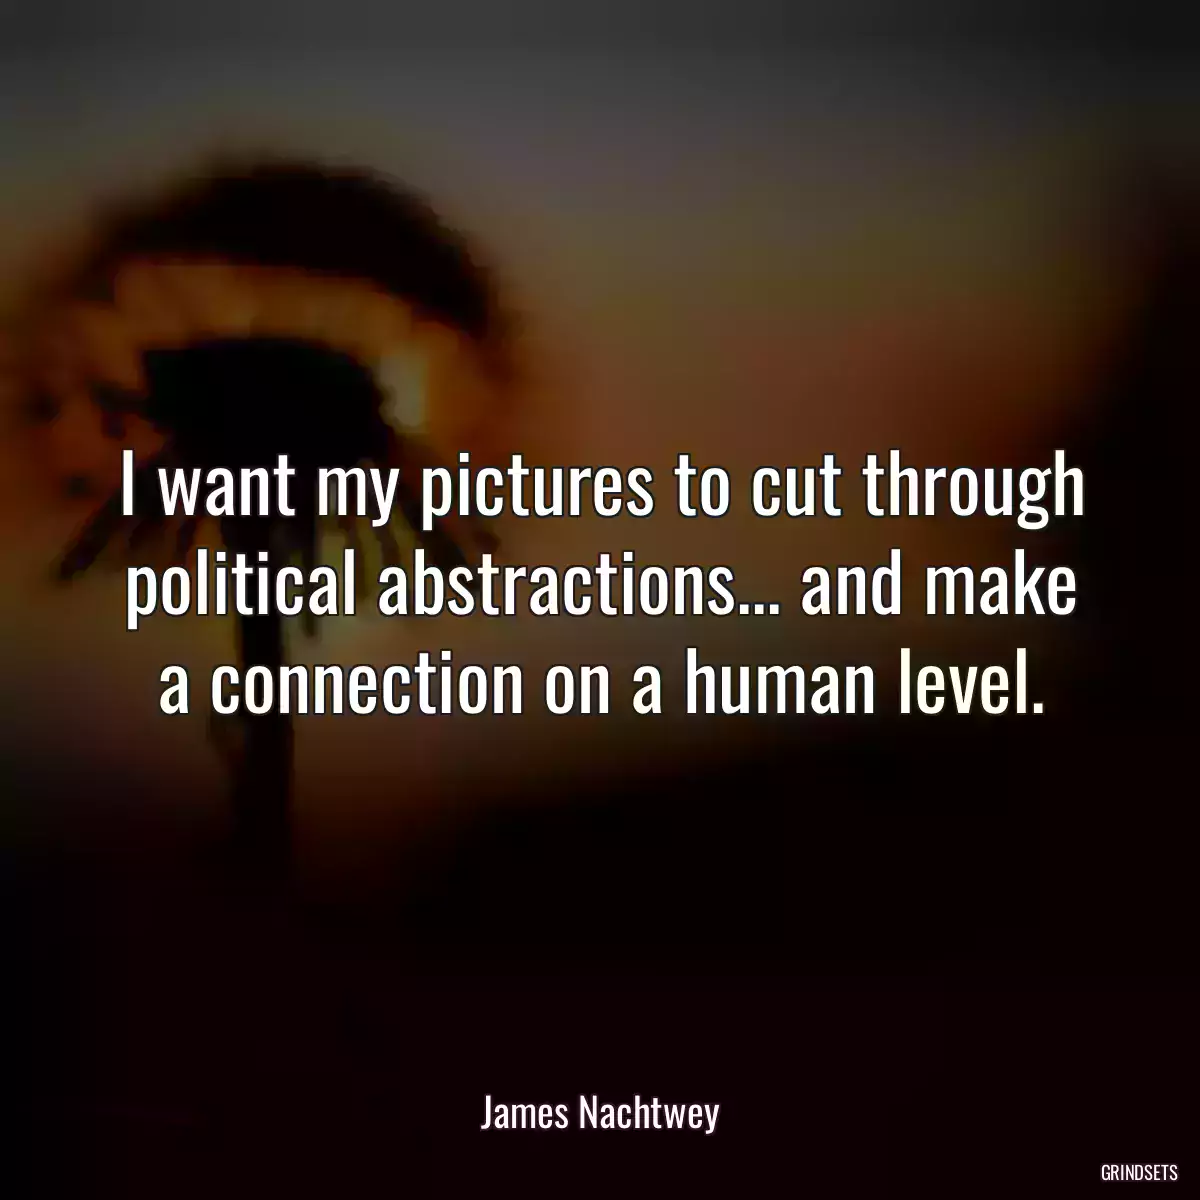 I want my pictures to cut through political abstractions... and make a connection on a human level.